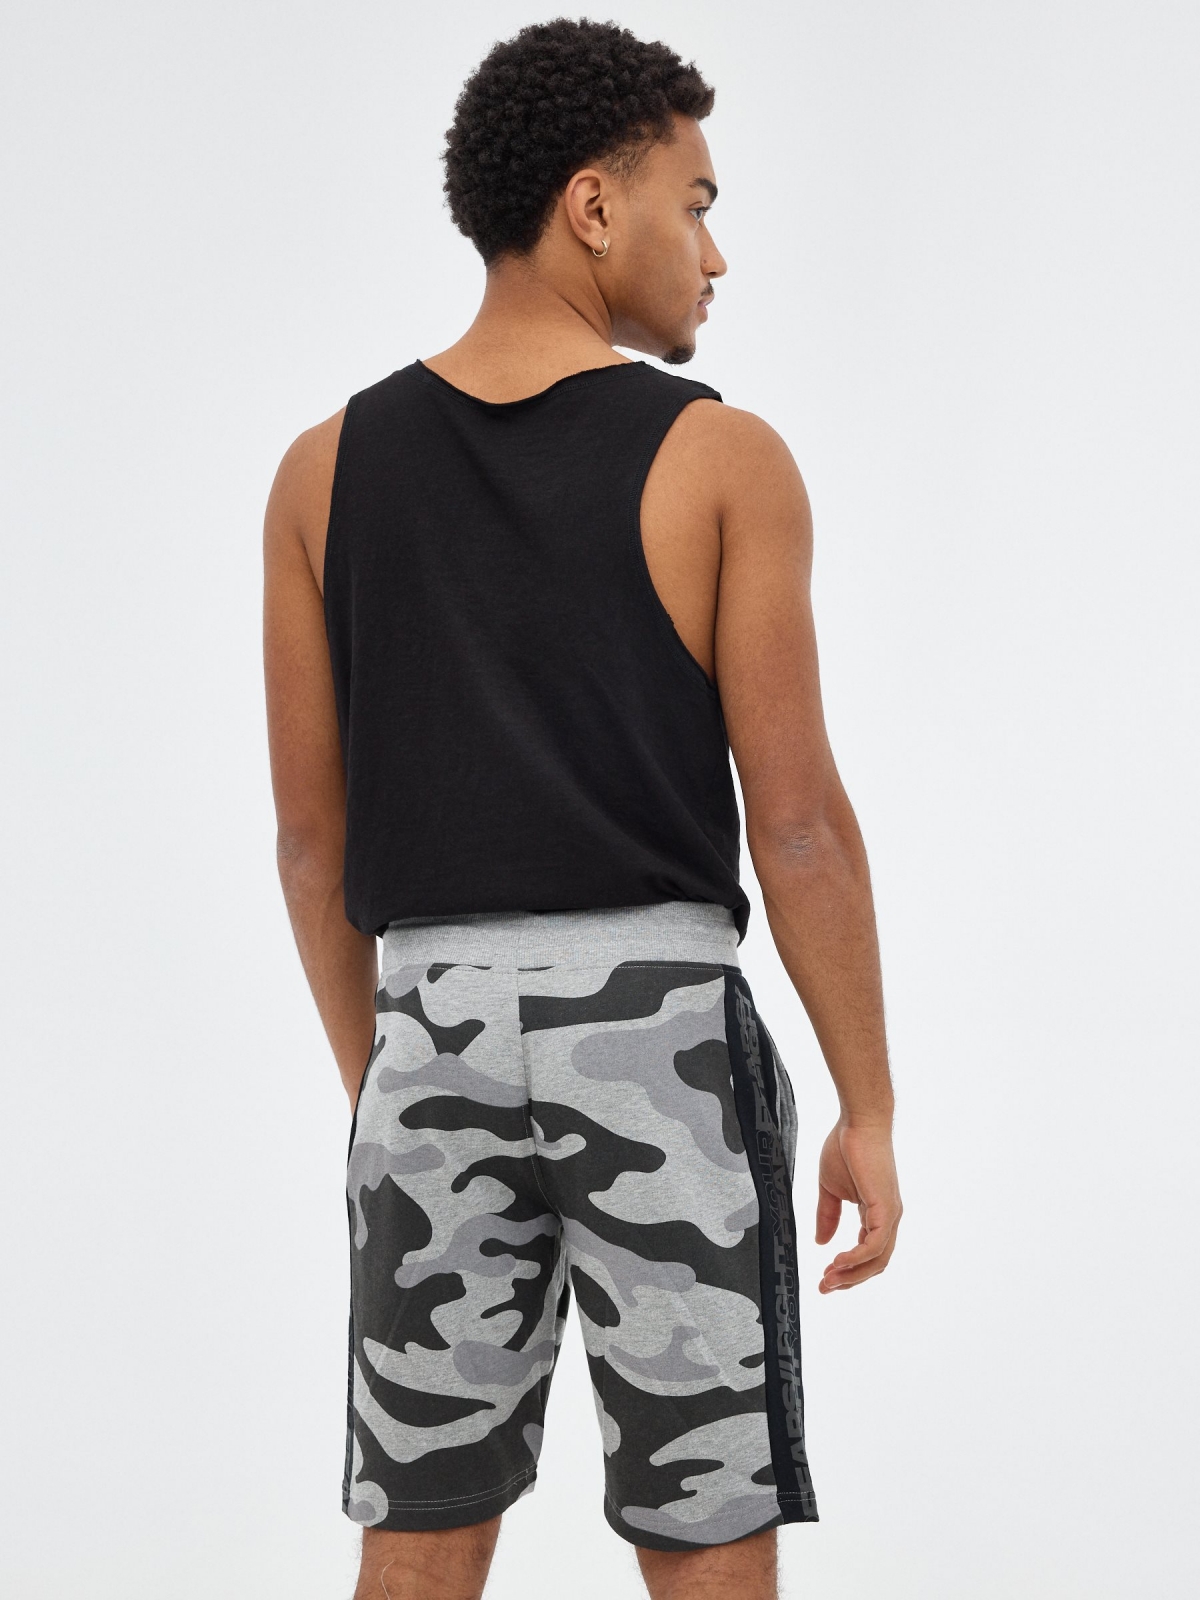 Camouflage jogger Bermuda shorts grey middle back view